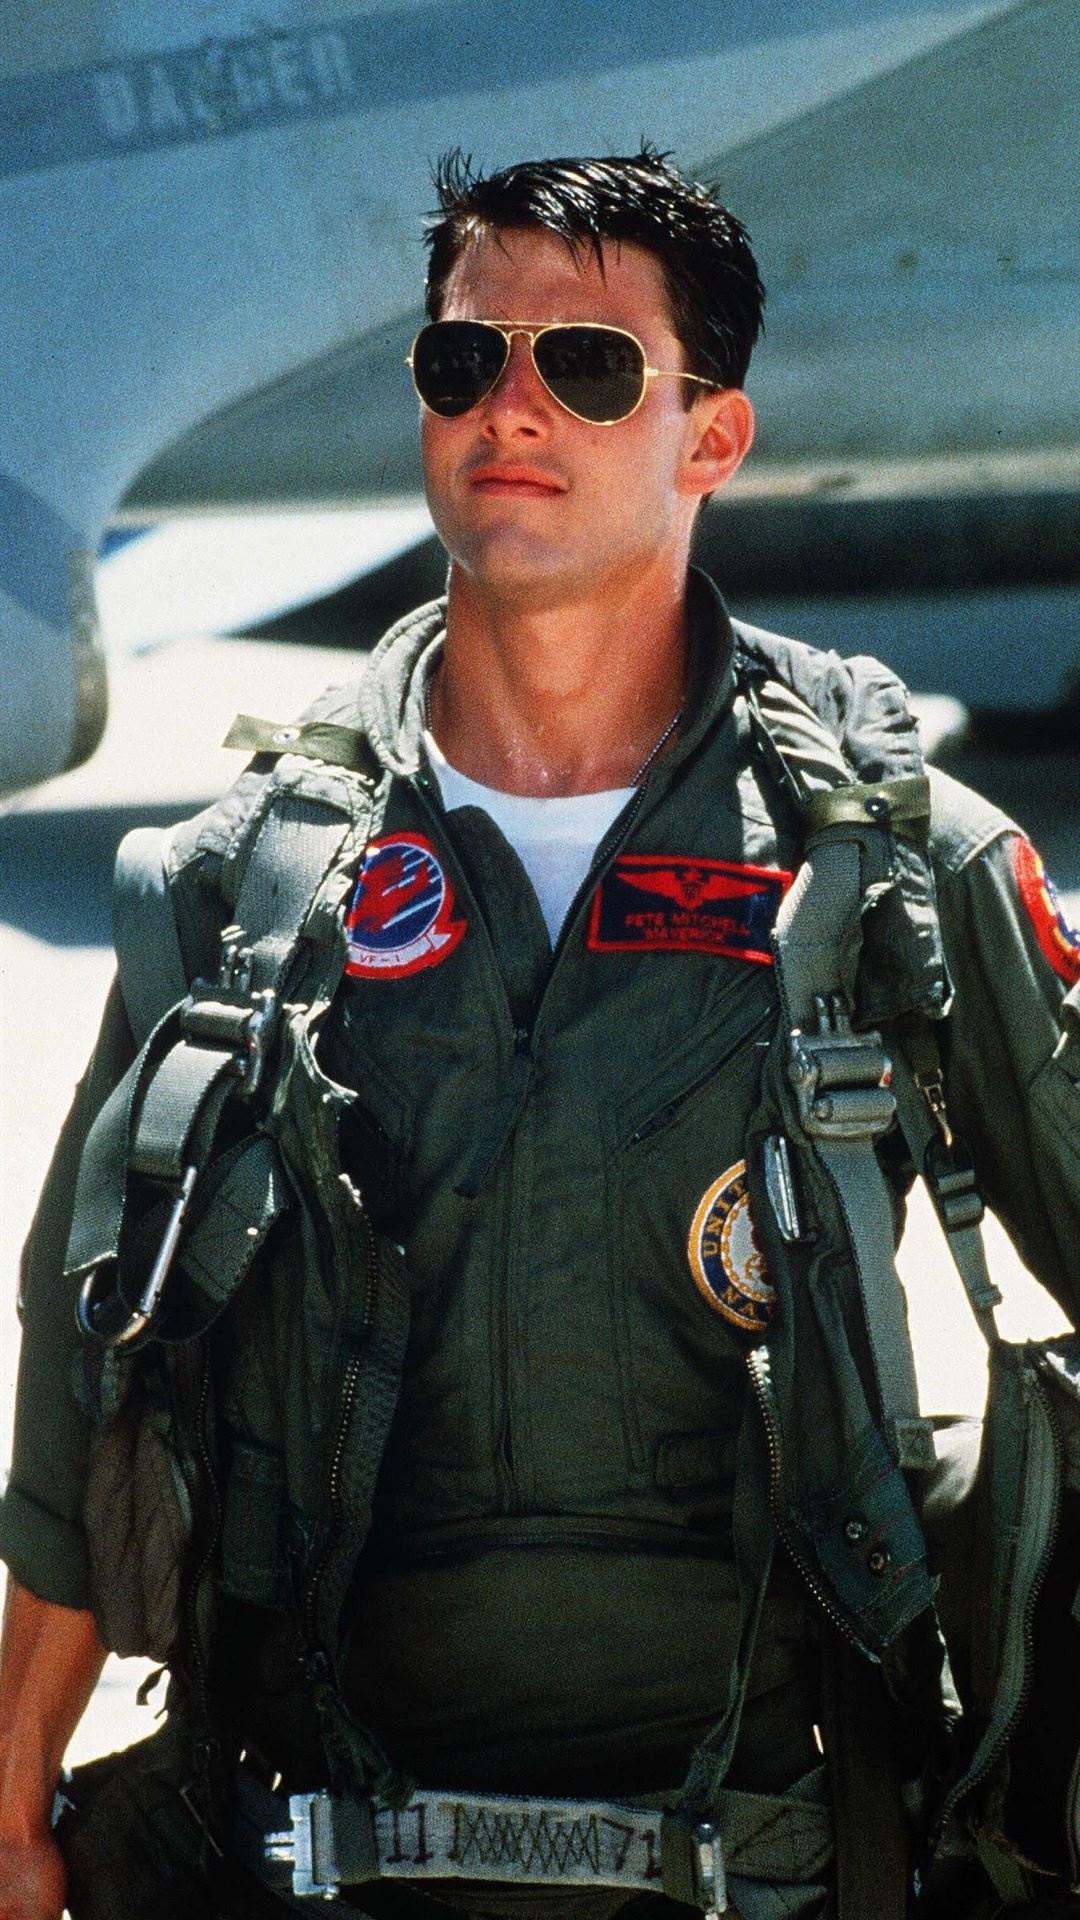 Top Gun Tom Cruise photo, iPhone wallpapers, Free download, Action movie star, 1080x1920 Full HD Phone